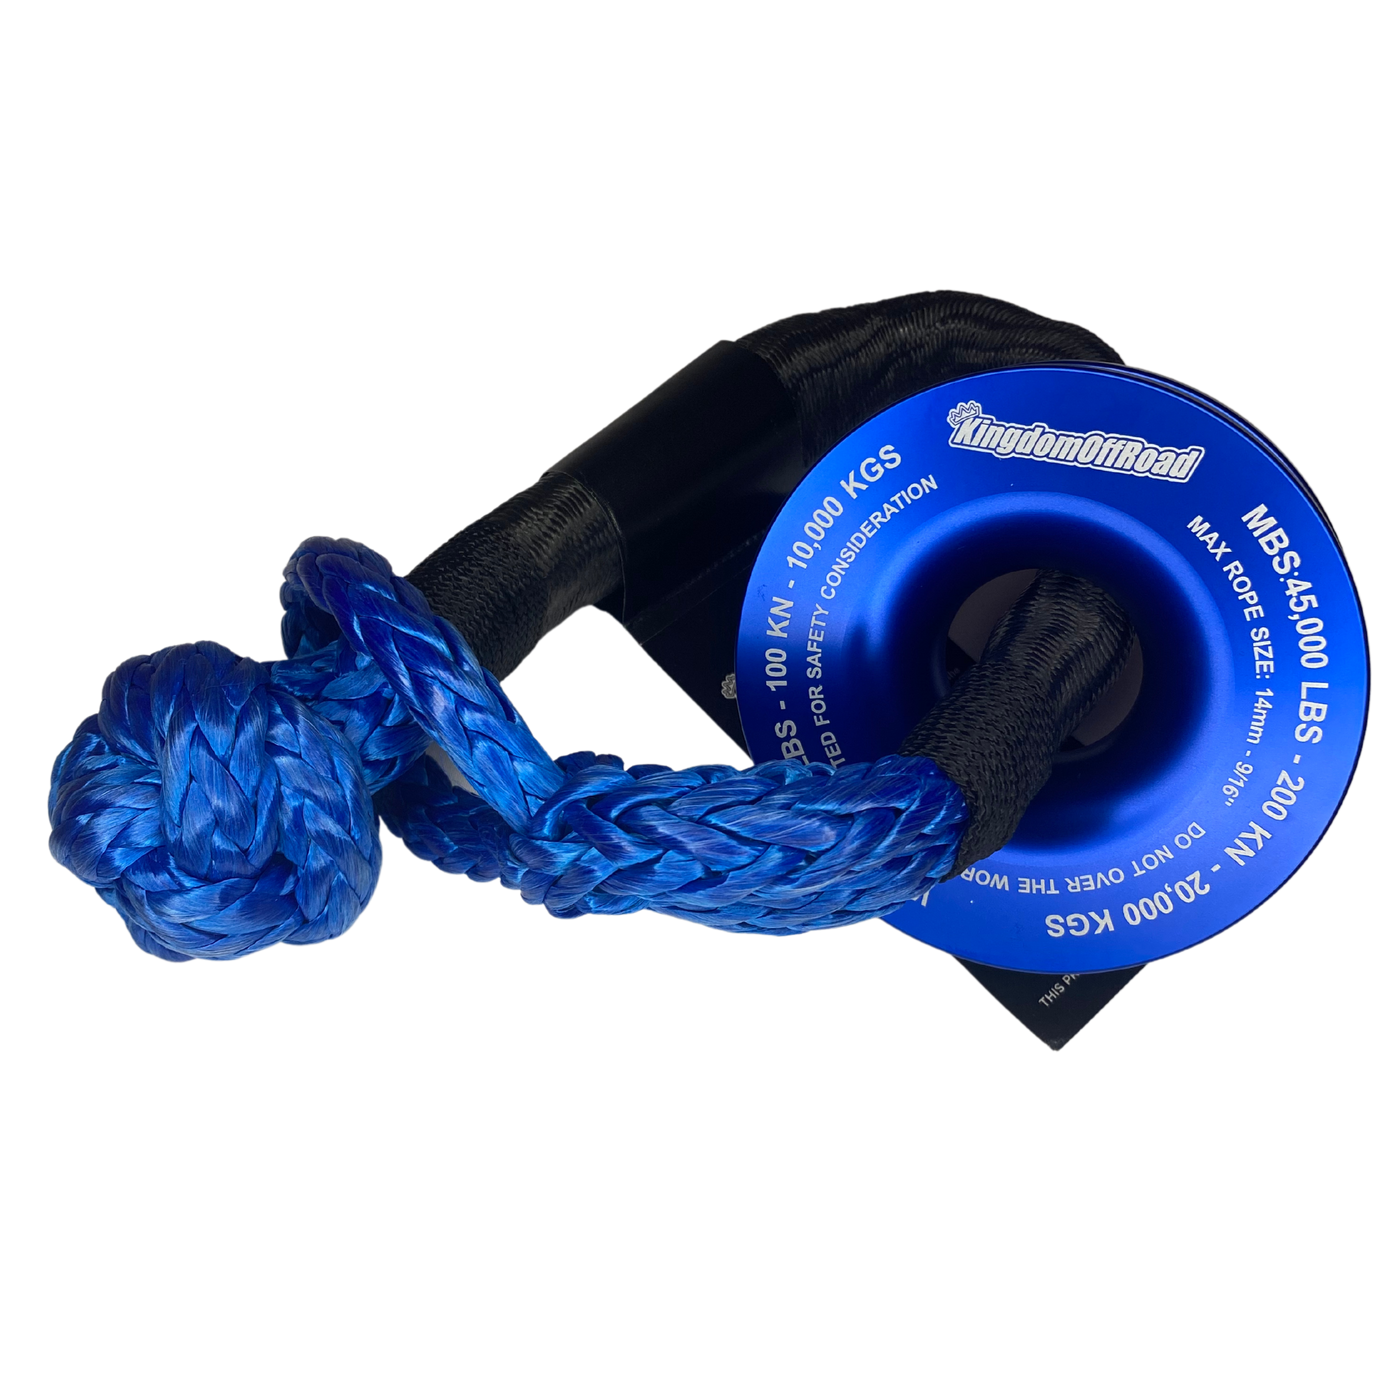 KINGDOM ULTIMATE RECOVERY KIT - 7/8" KINETIC ROPE